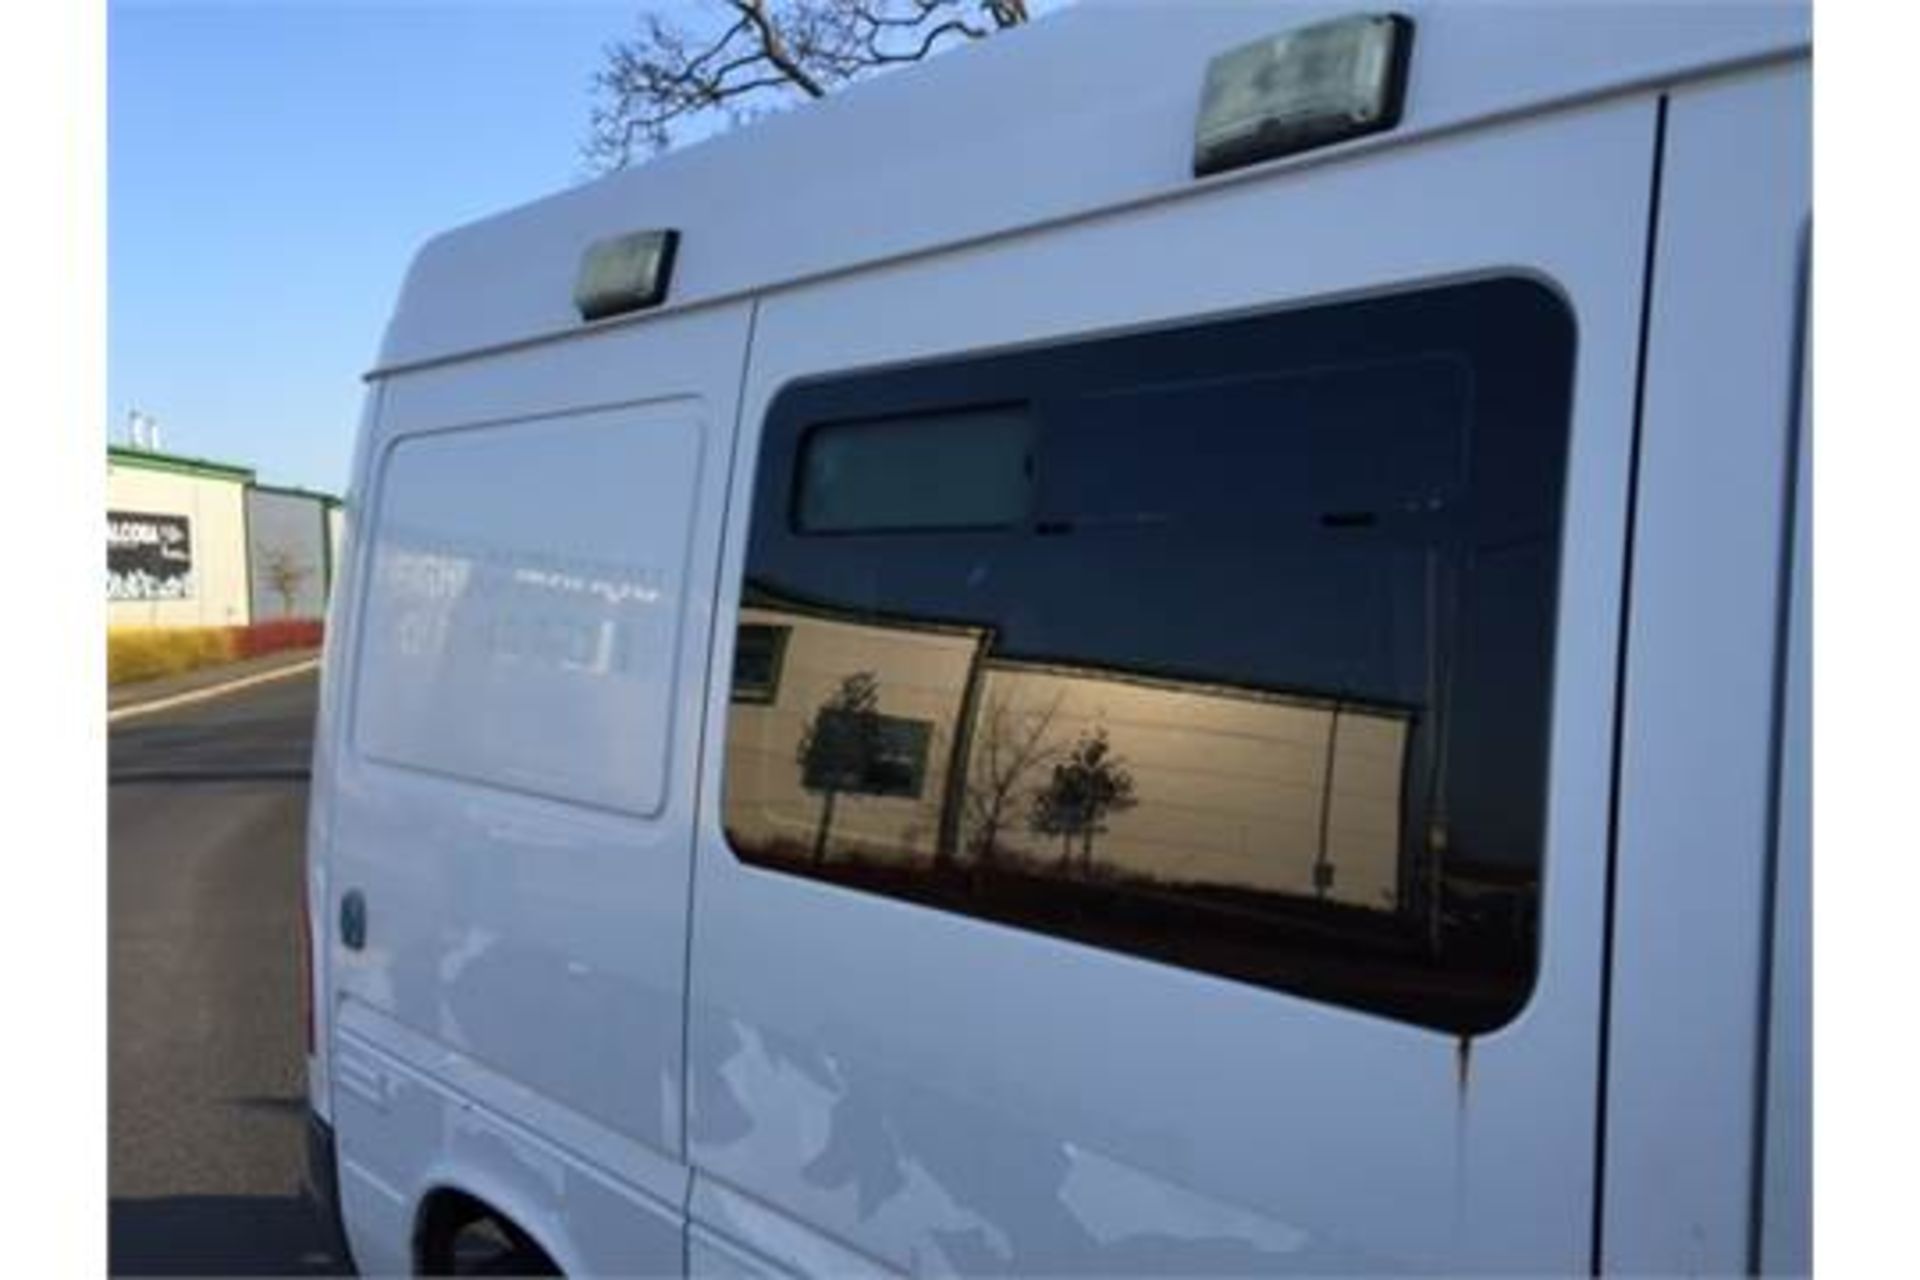 2005 Mercedes Sprinter 311 cdi 2148cc Diesel Van with side windows Owned and used by the police from - Image 16 of 23